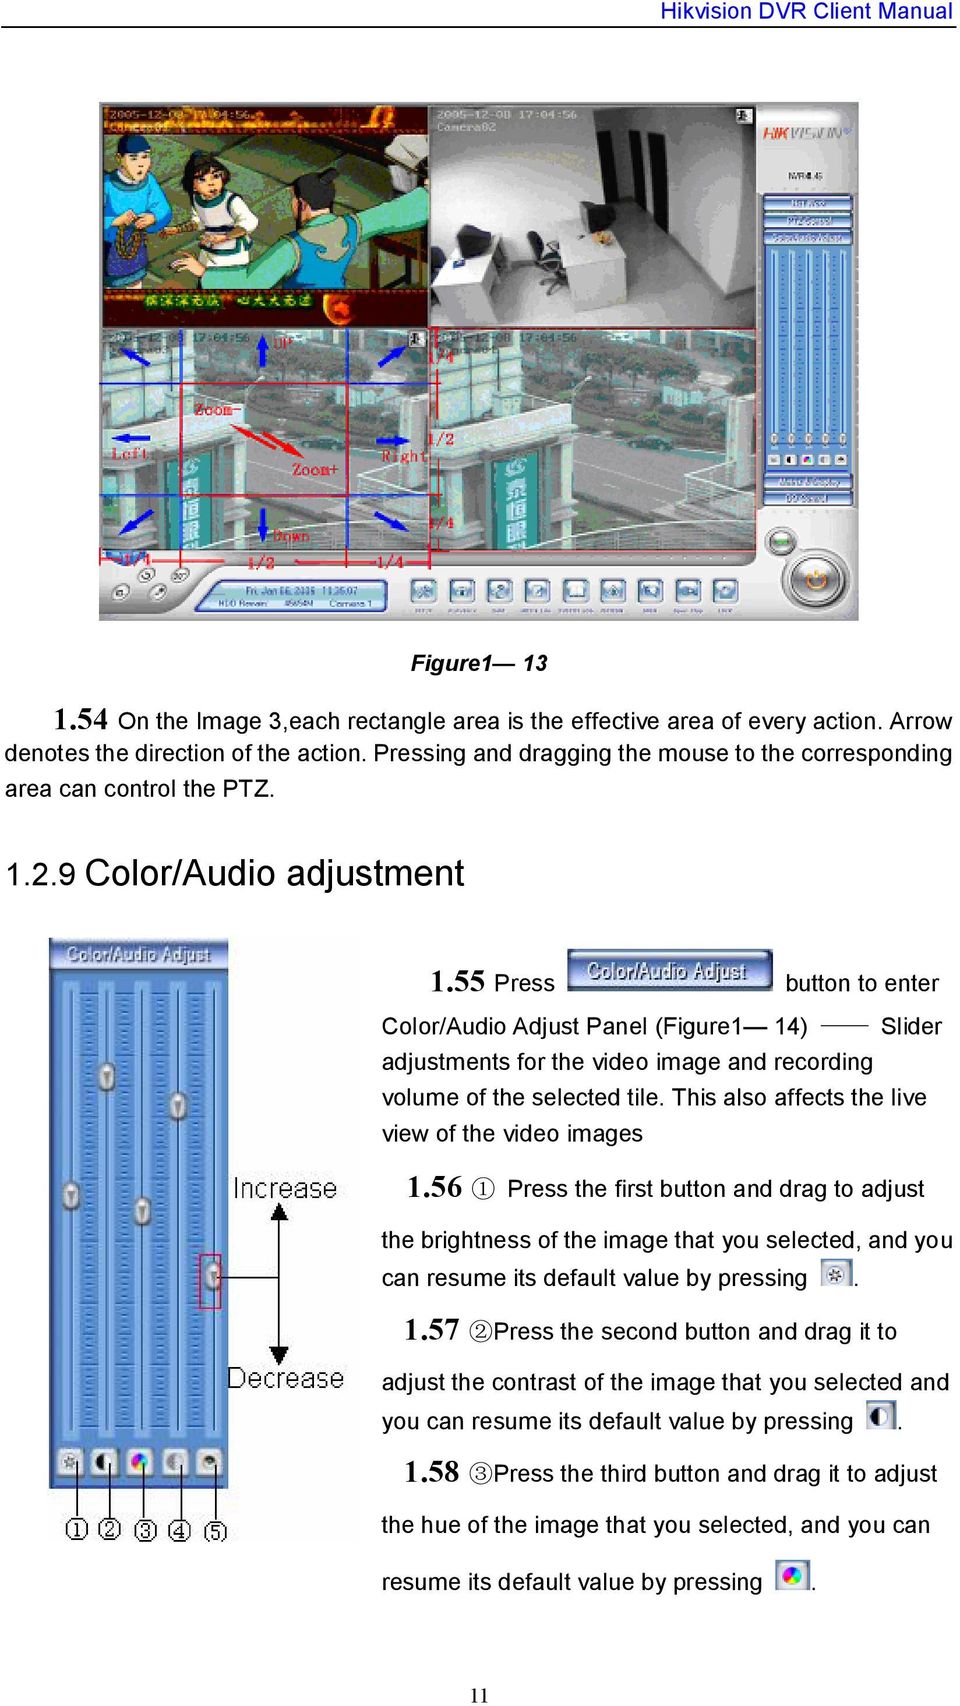 55 Press button to enter Color/Audio Adjust Panel (Figure1 14) Slider adjustments for the video image and recording volume of the selected tile. This also affects the live view of the video images 1.